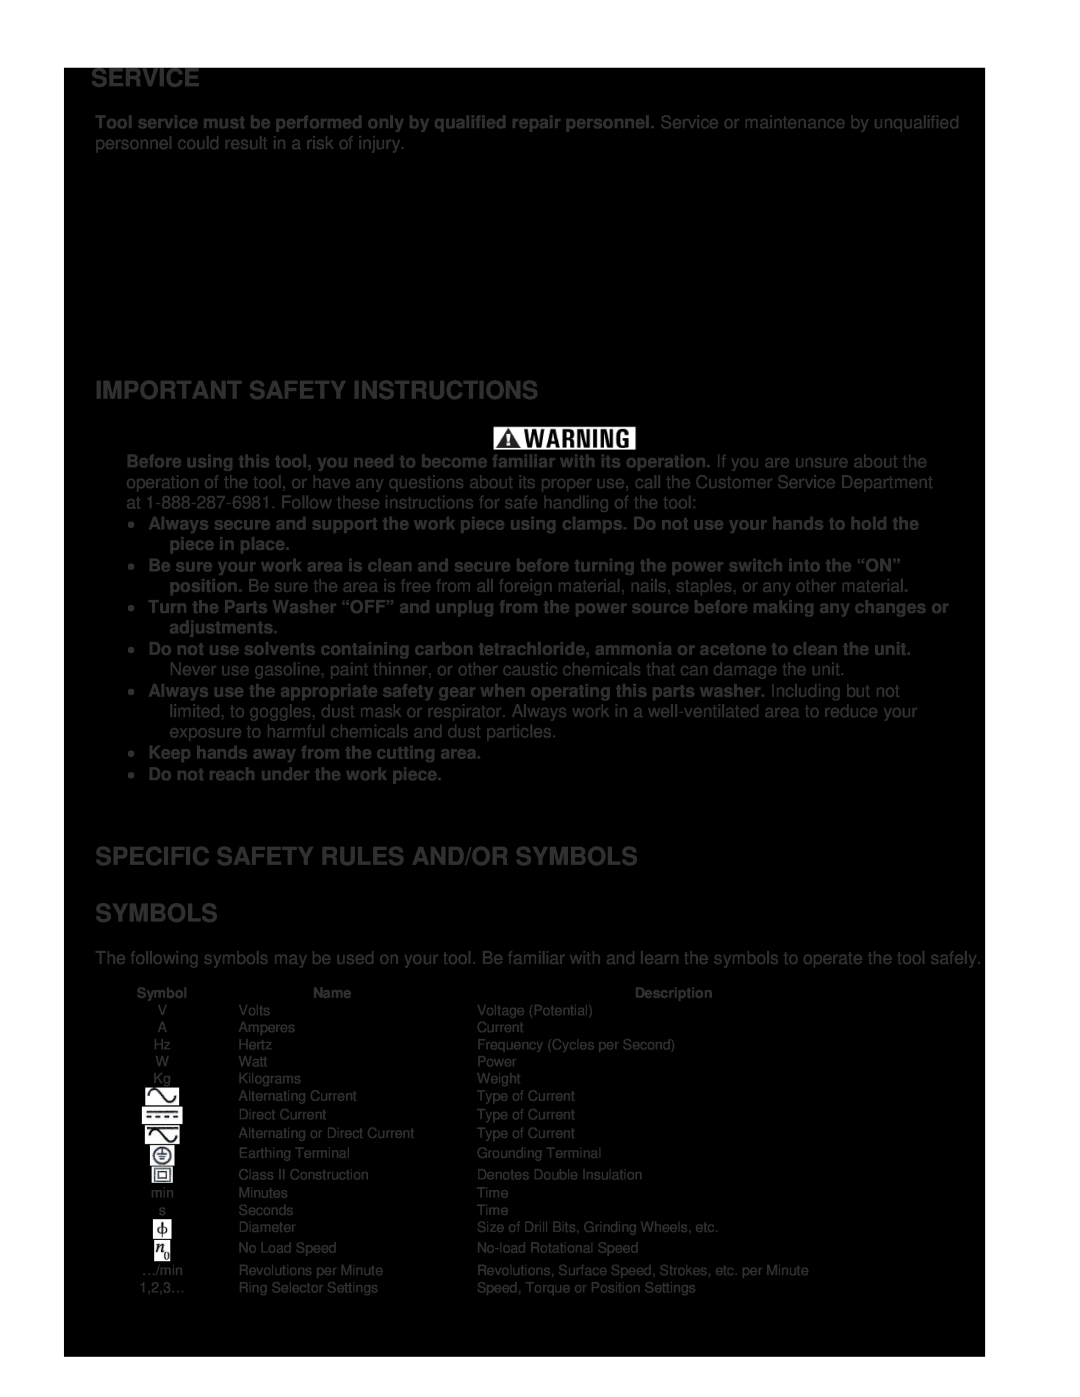 Buffalo Technology PWASH40201407 Service, Save These Instructions For Future Reference, Important Safety Instructions 